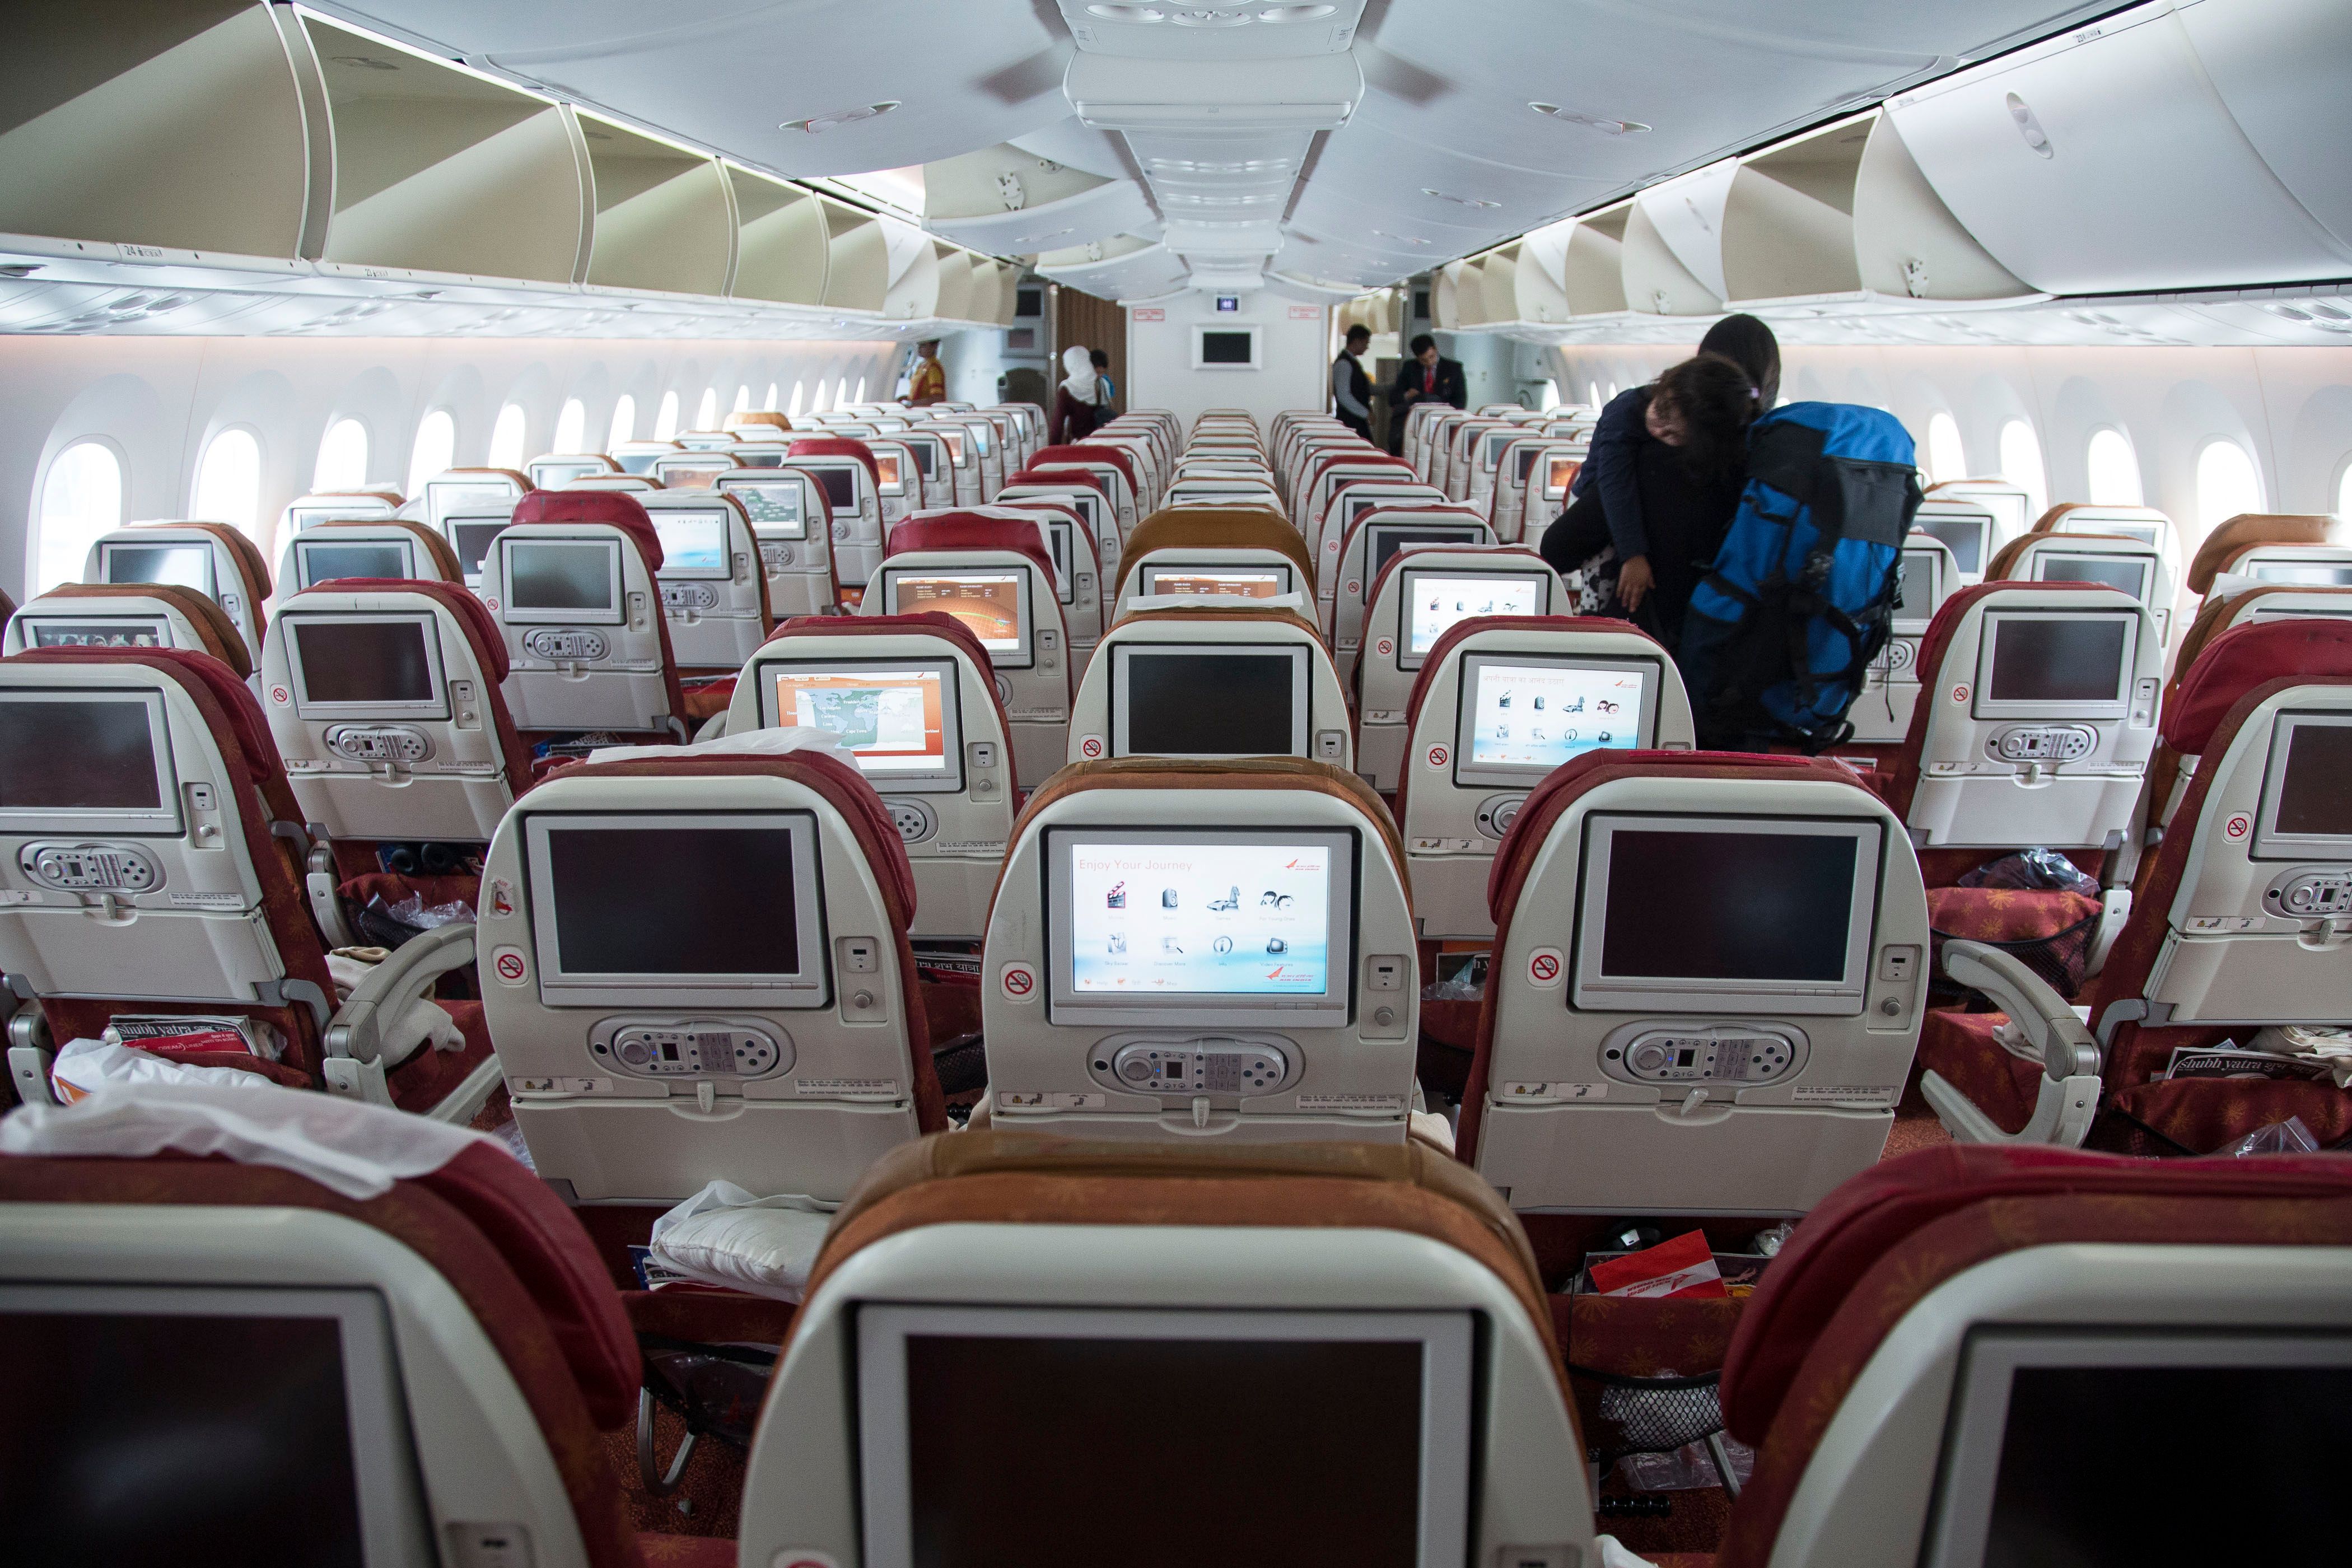 Air India Boeing 787 showing cabin seats and in-flight entertainment screen